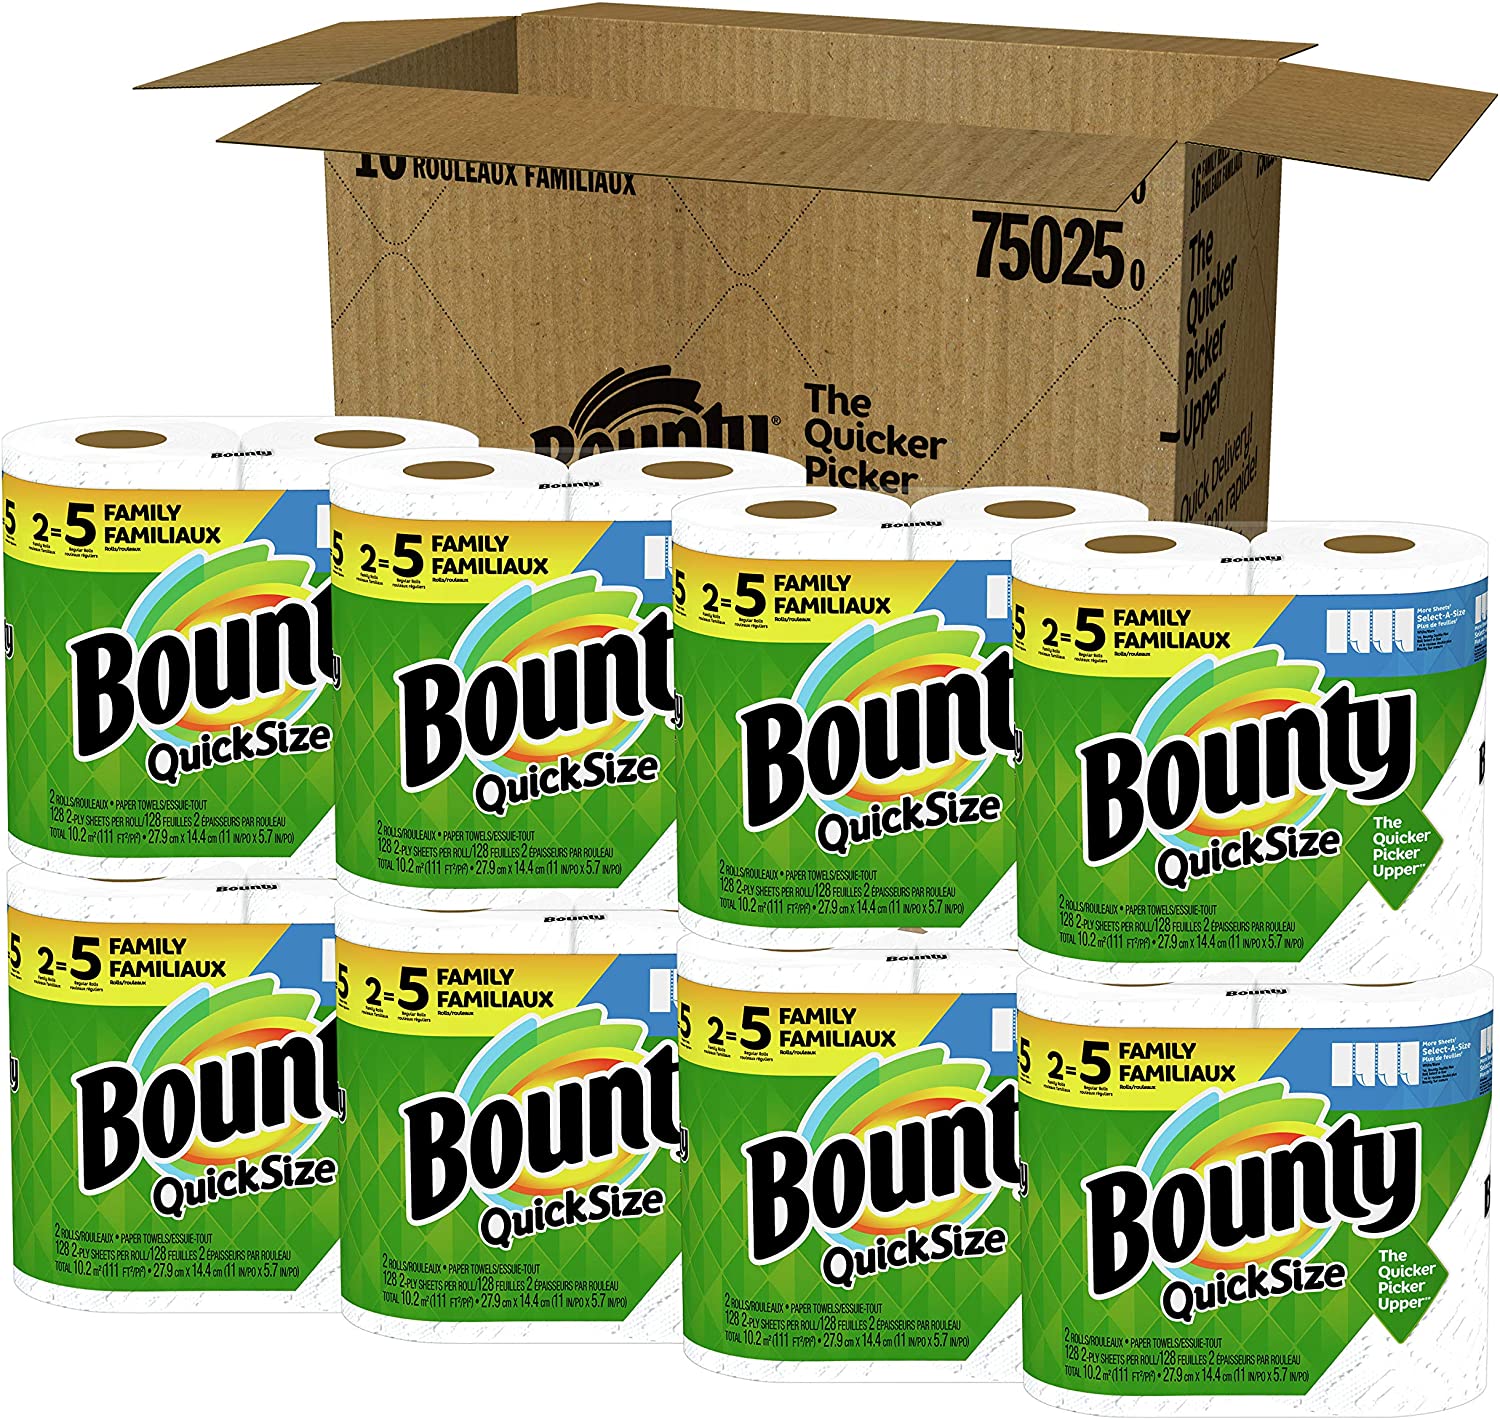 White Bounty Quick-Size Paper Towels 16 Family Rolls = 40 Regular Rolls May 